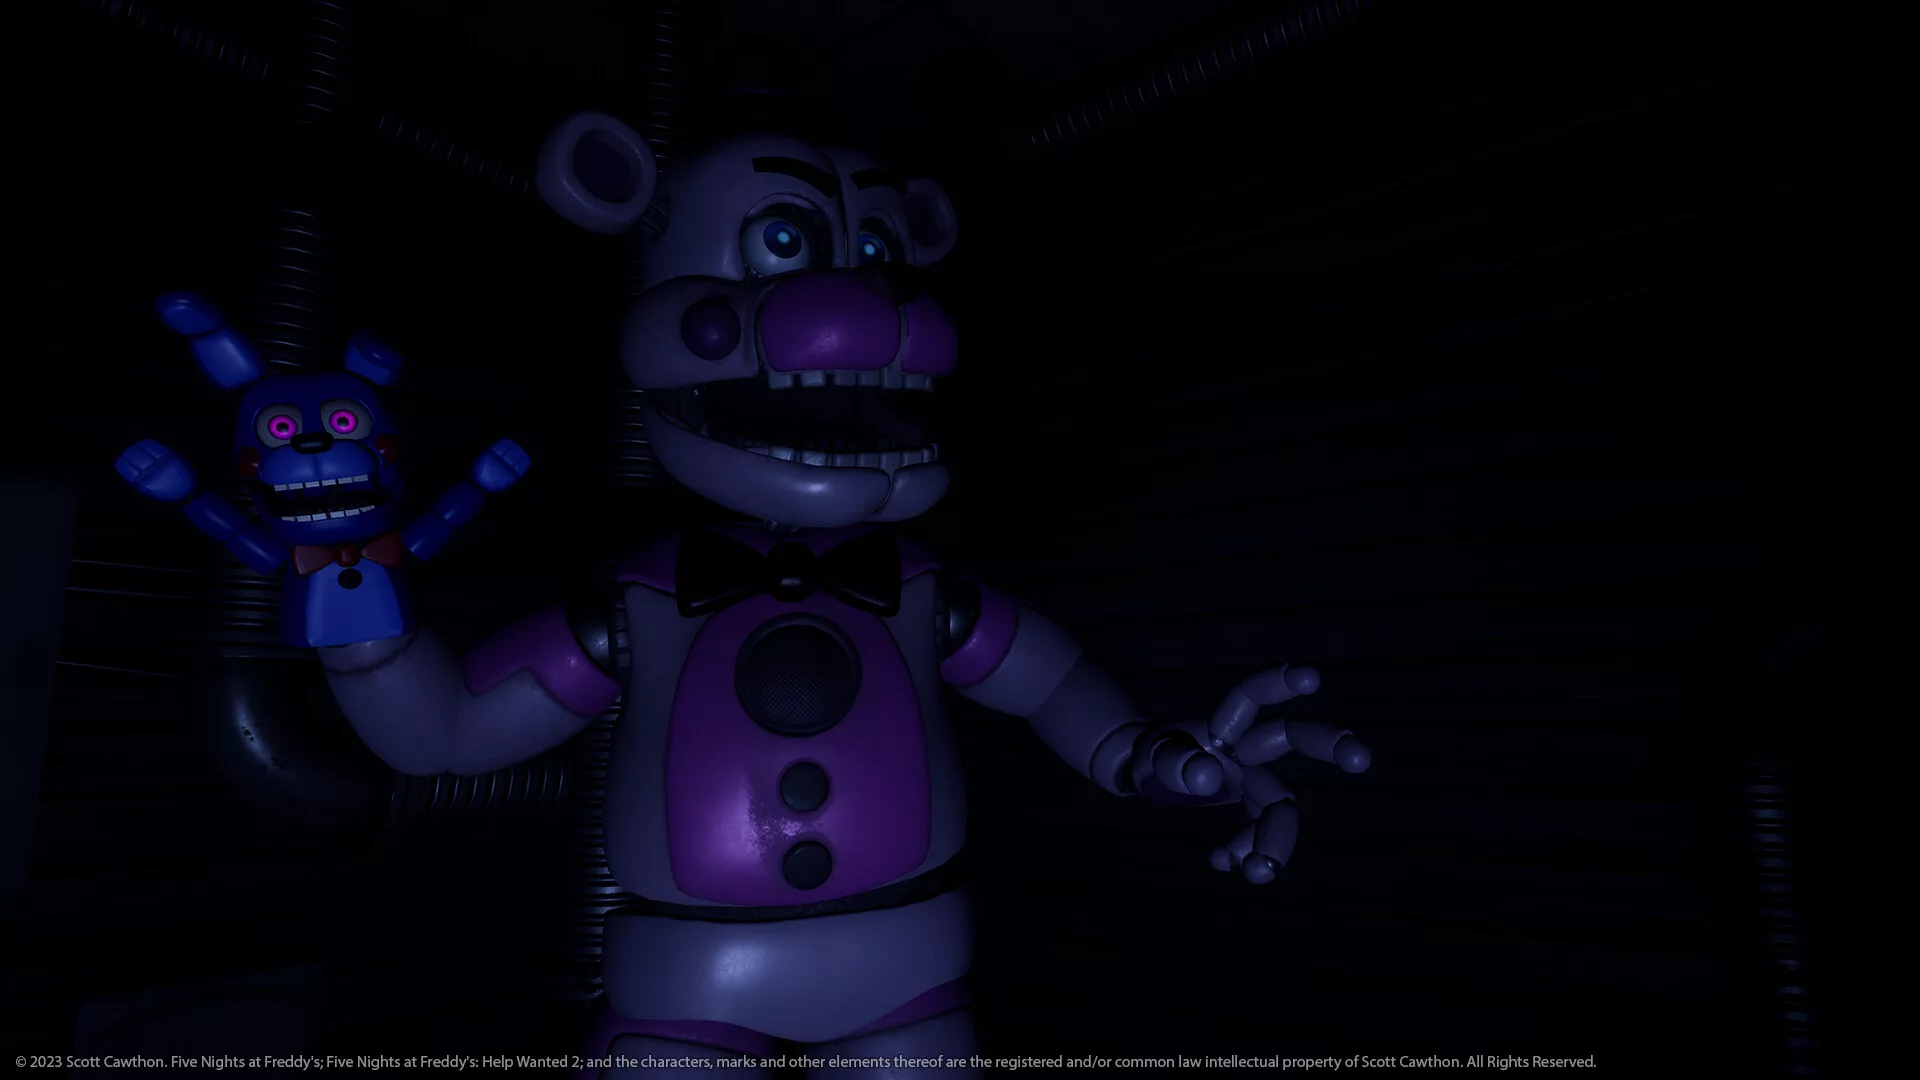 Five Nights at Freddys Help Wanted 2 Torrent